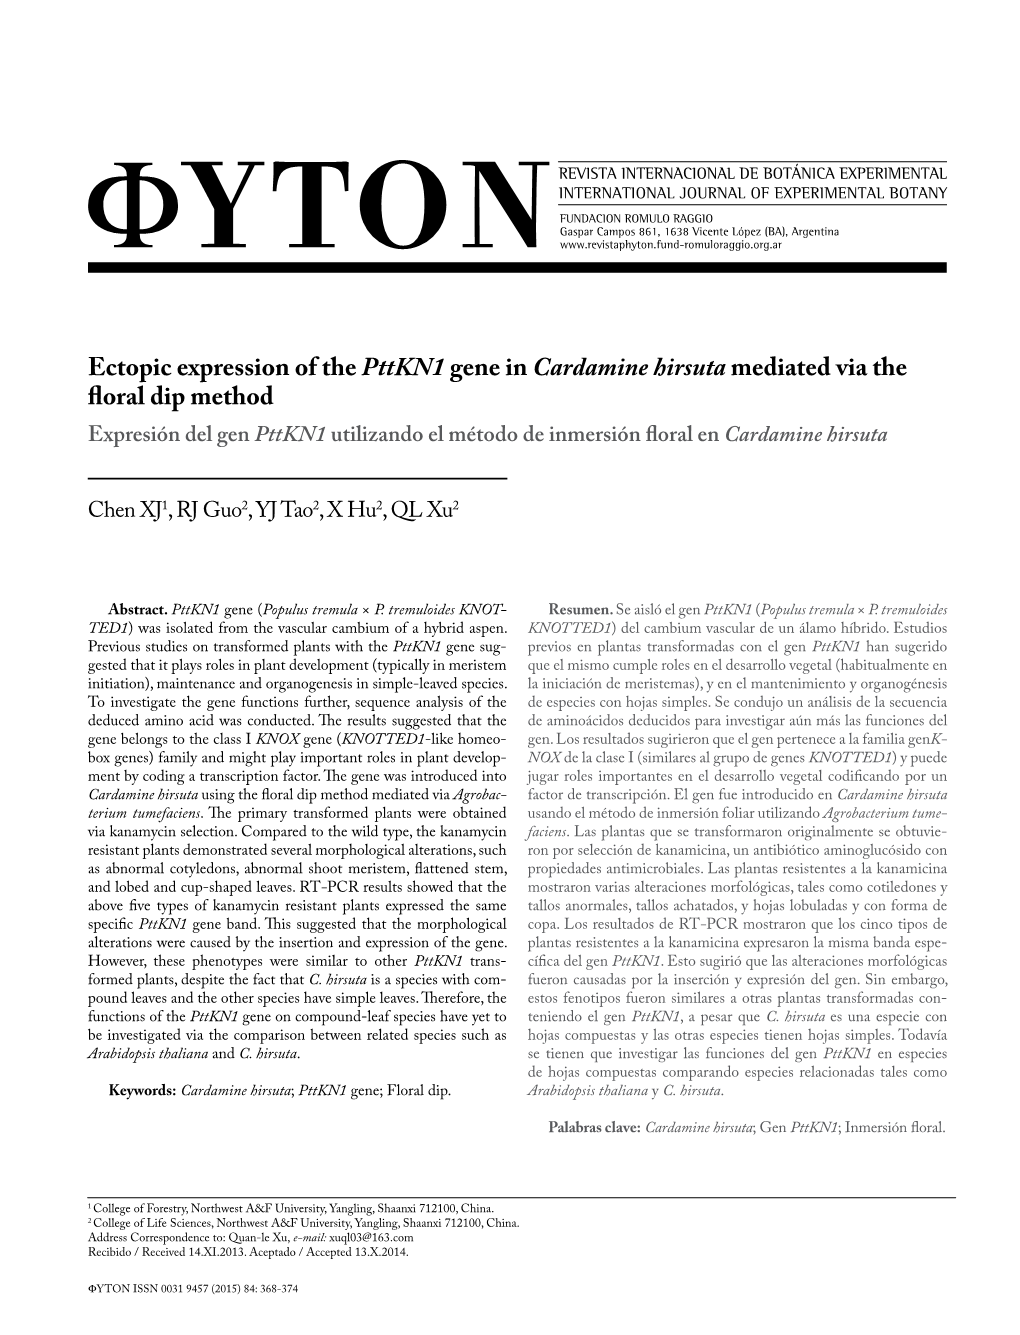 Ectopic Expression of the Pttkn1 Gene in Cardamine Hirsuta Mediated Via